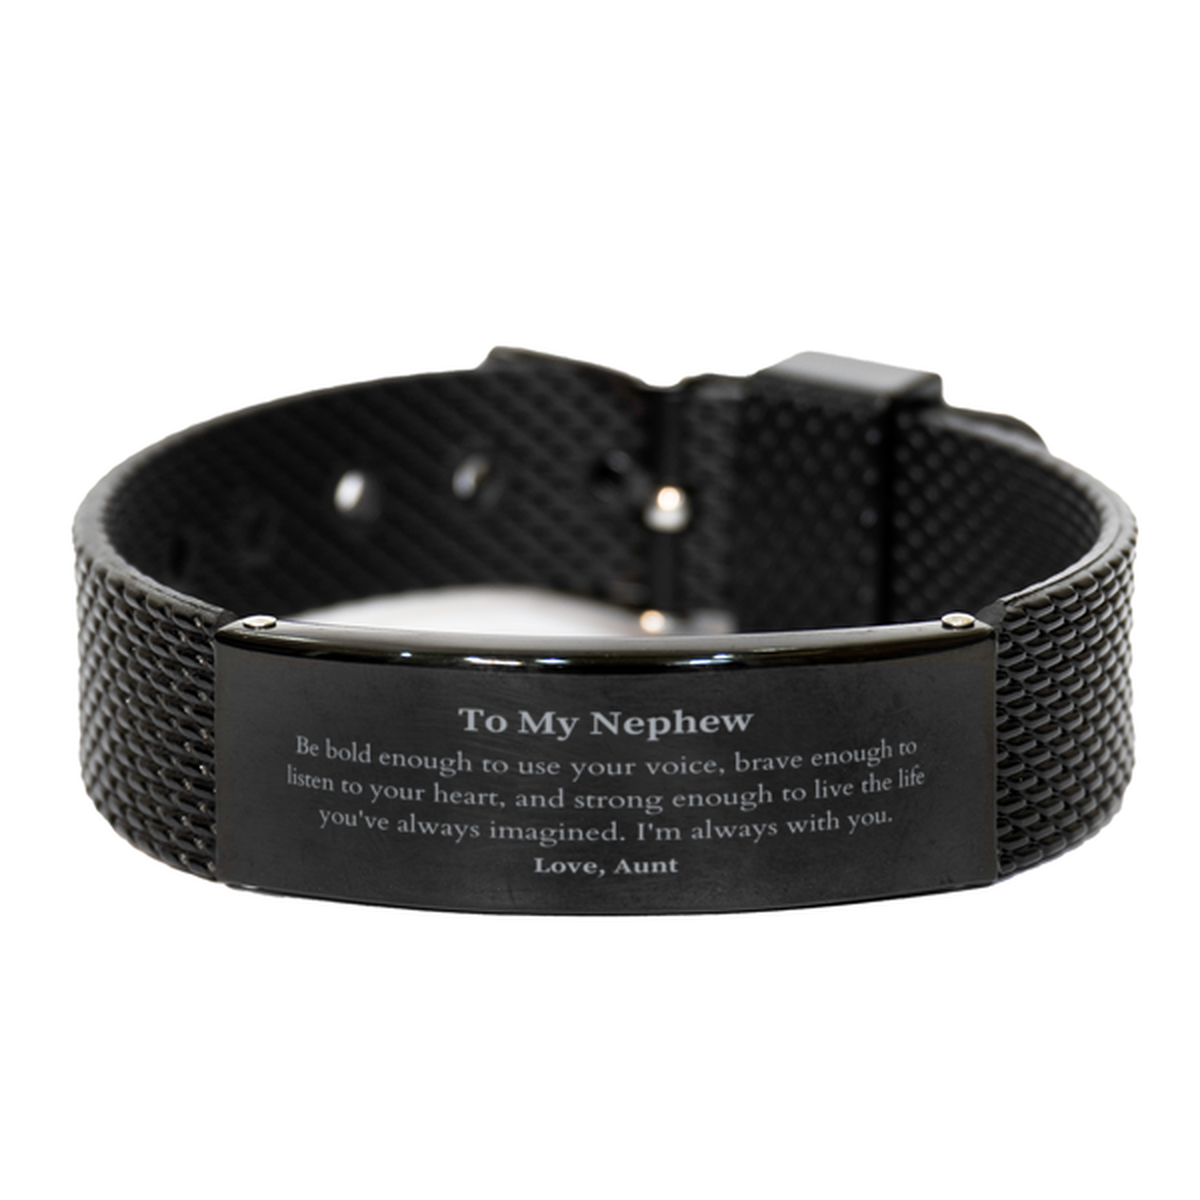 Keepsake Nephew Black Shark Mesh Bracelet Gift Idea Graduation Christmas Birthday Nephew from Aunt, Nephew Be bold enough to use your voice, brave enough to listen to your heart. Love, Aunt